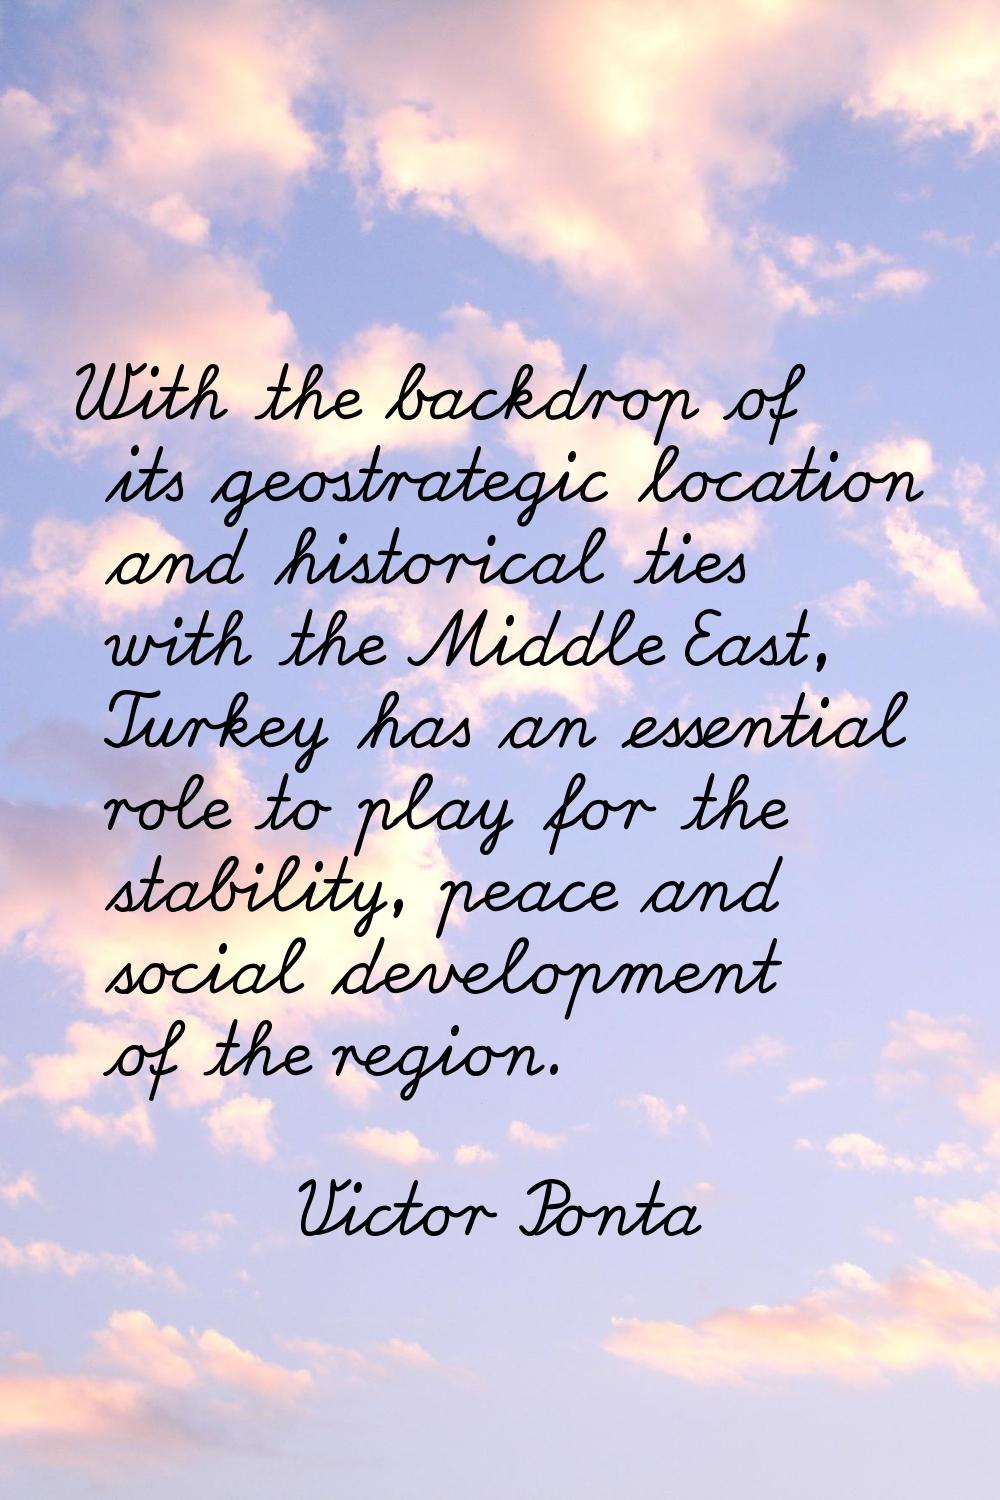 With the backdrop of its geostrategic location and historical ties with the Middle East, Turkey has